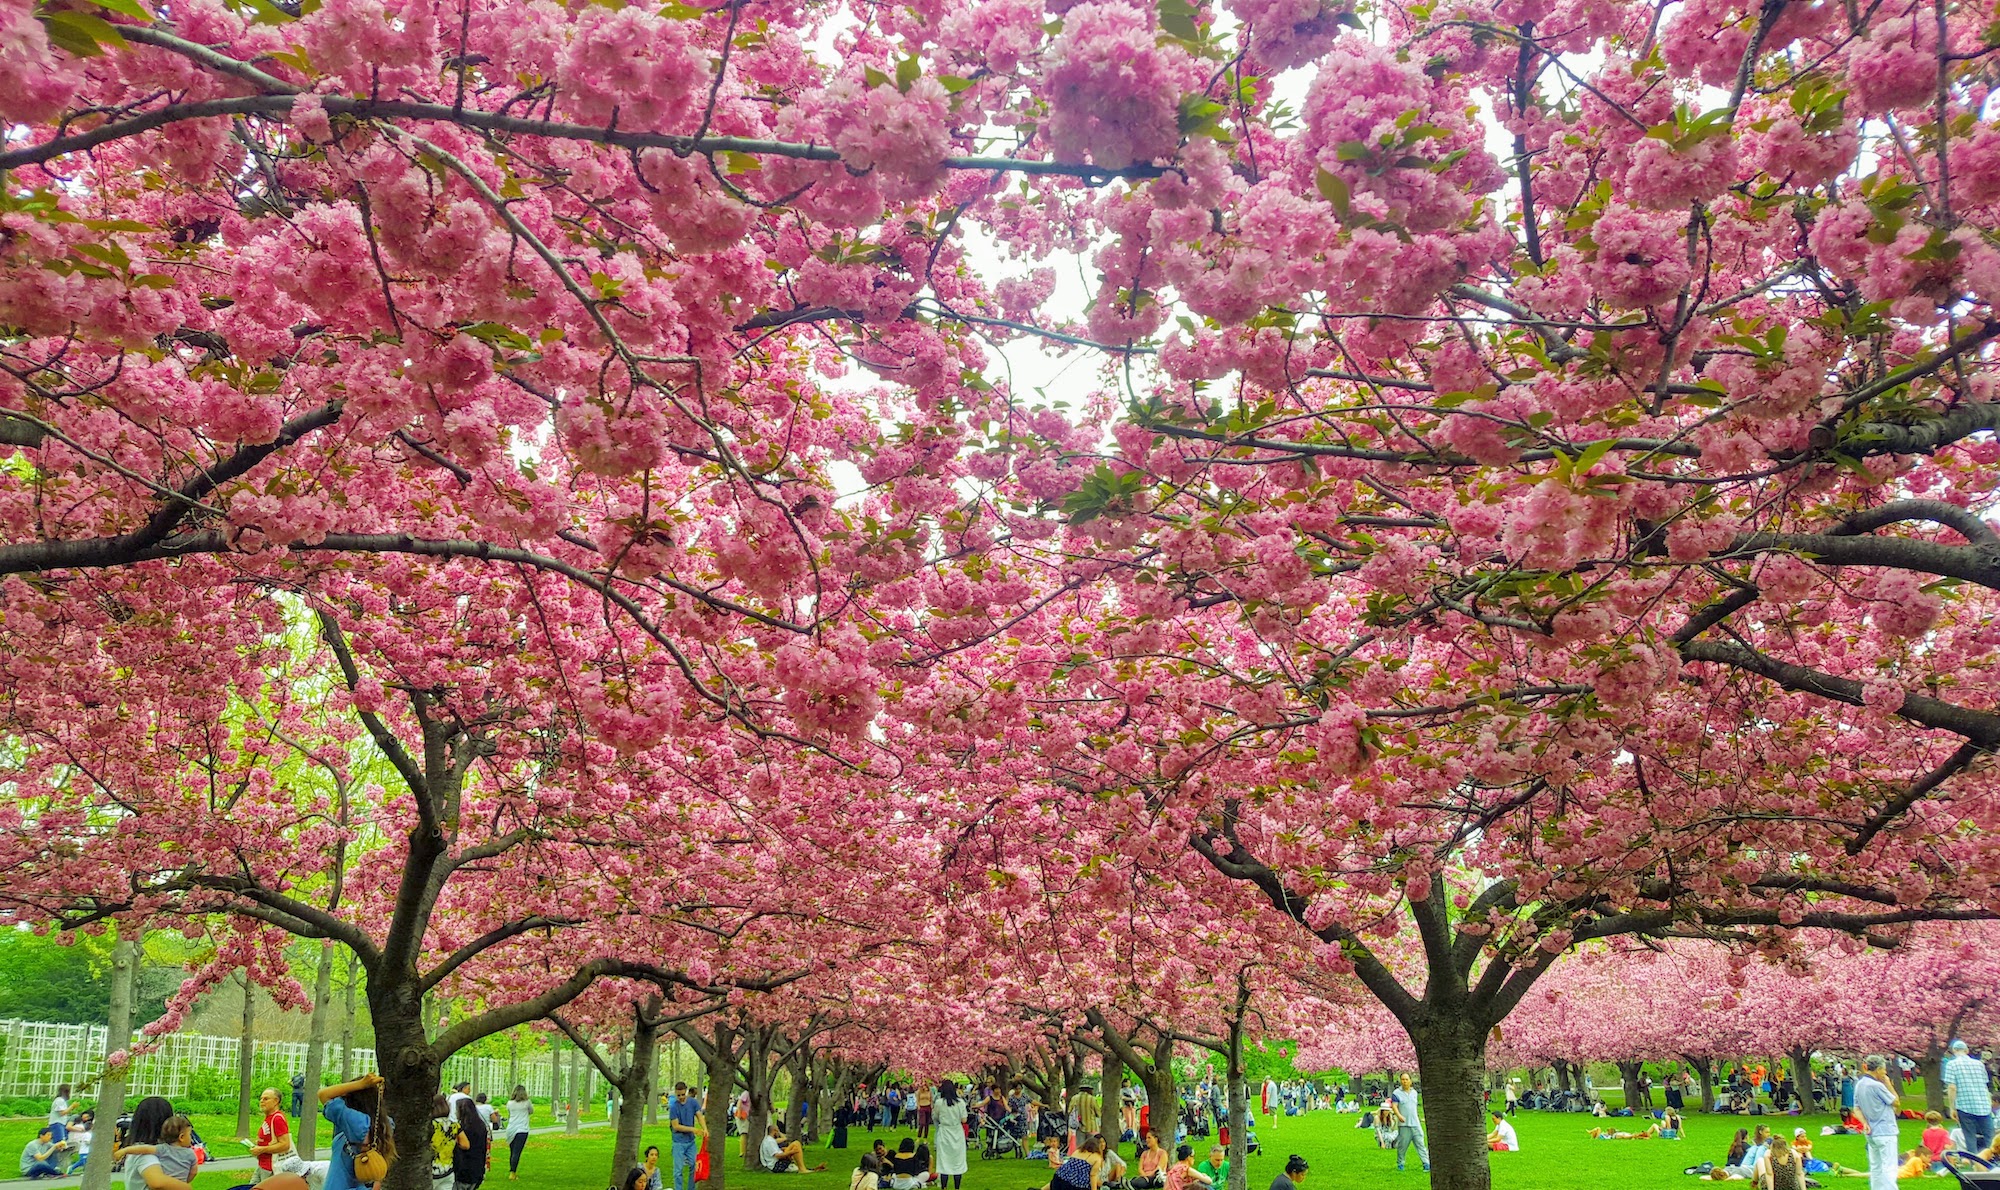 Best Parks to See Cherry Blossoms in New York City NYC Parks